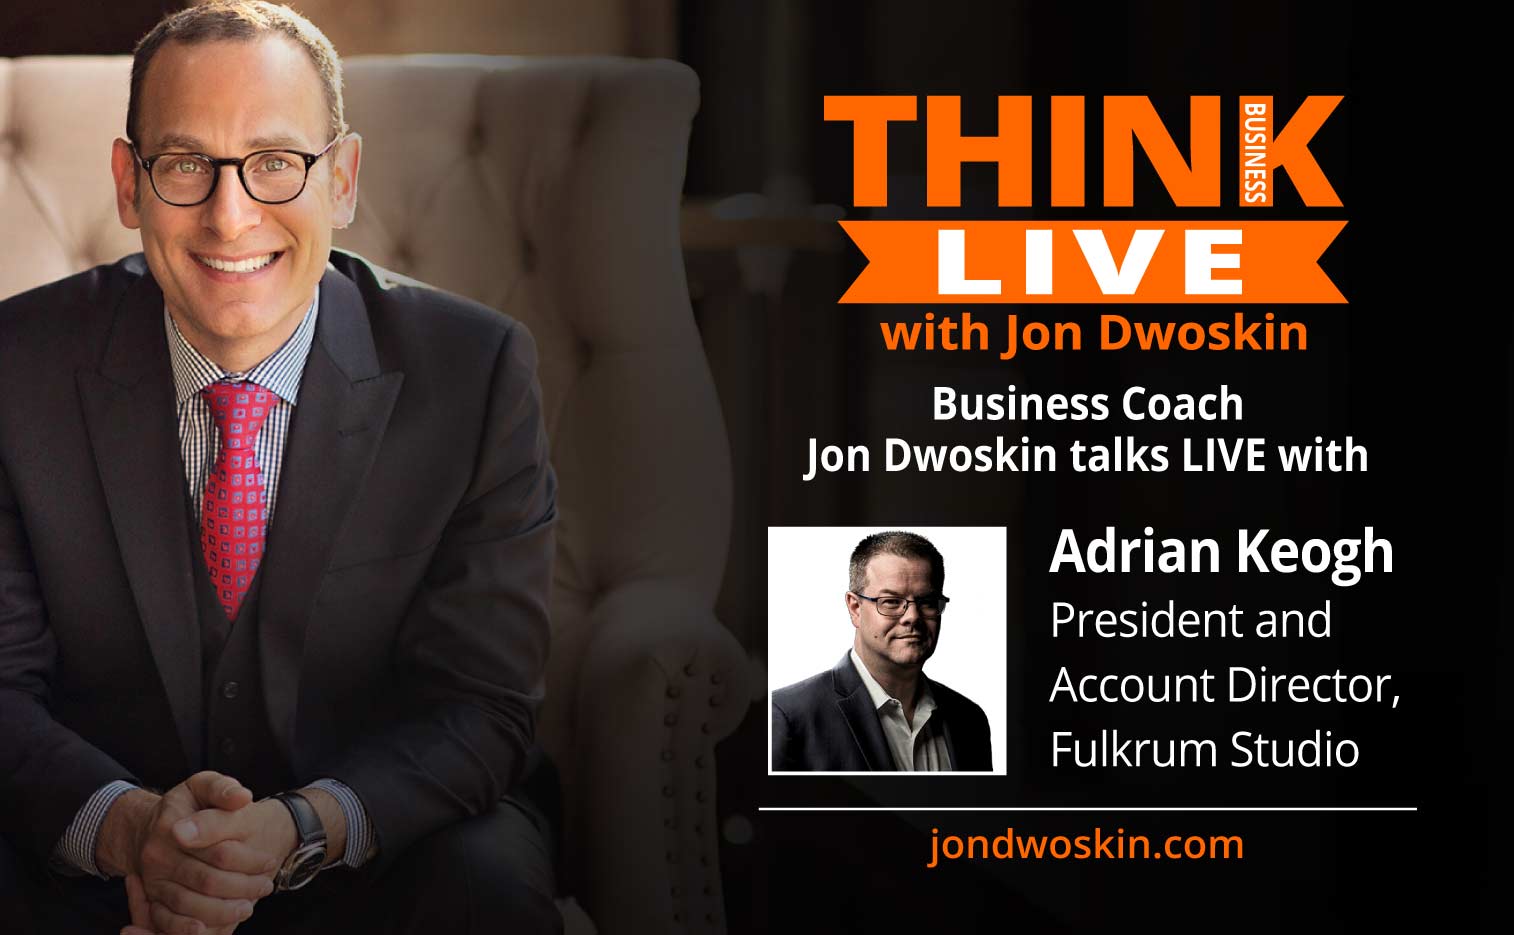 Jon Dwoskin Talks LIVE with Adrian Keogh, President and Account ...